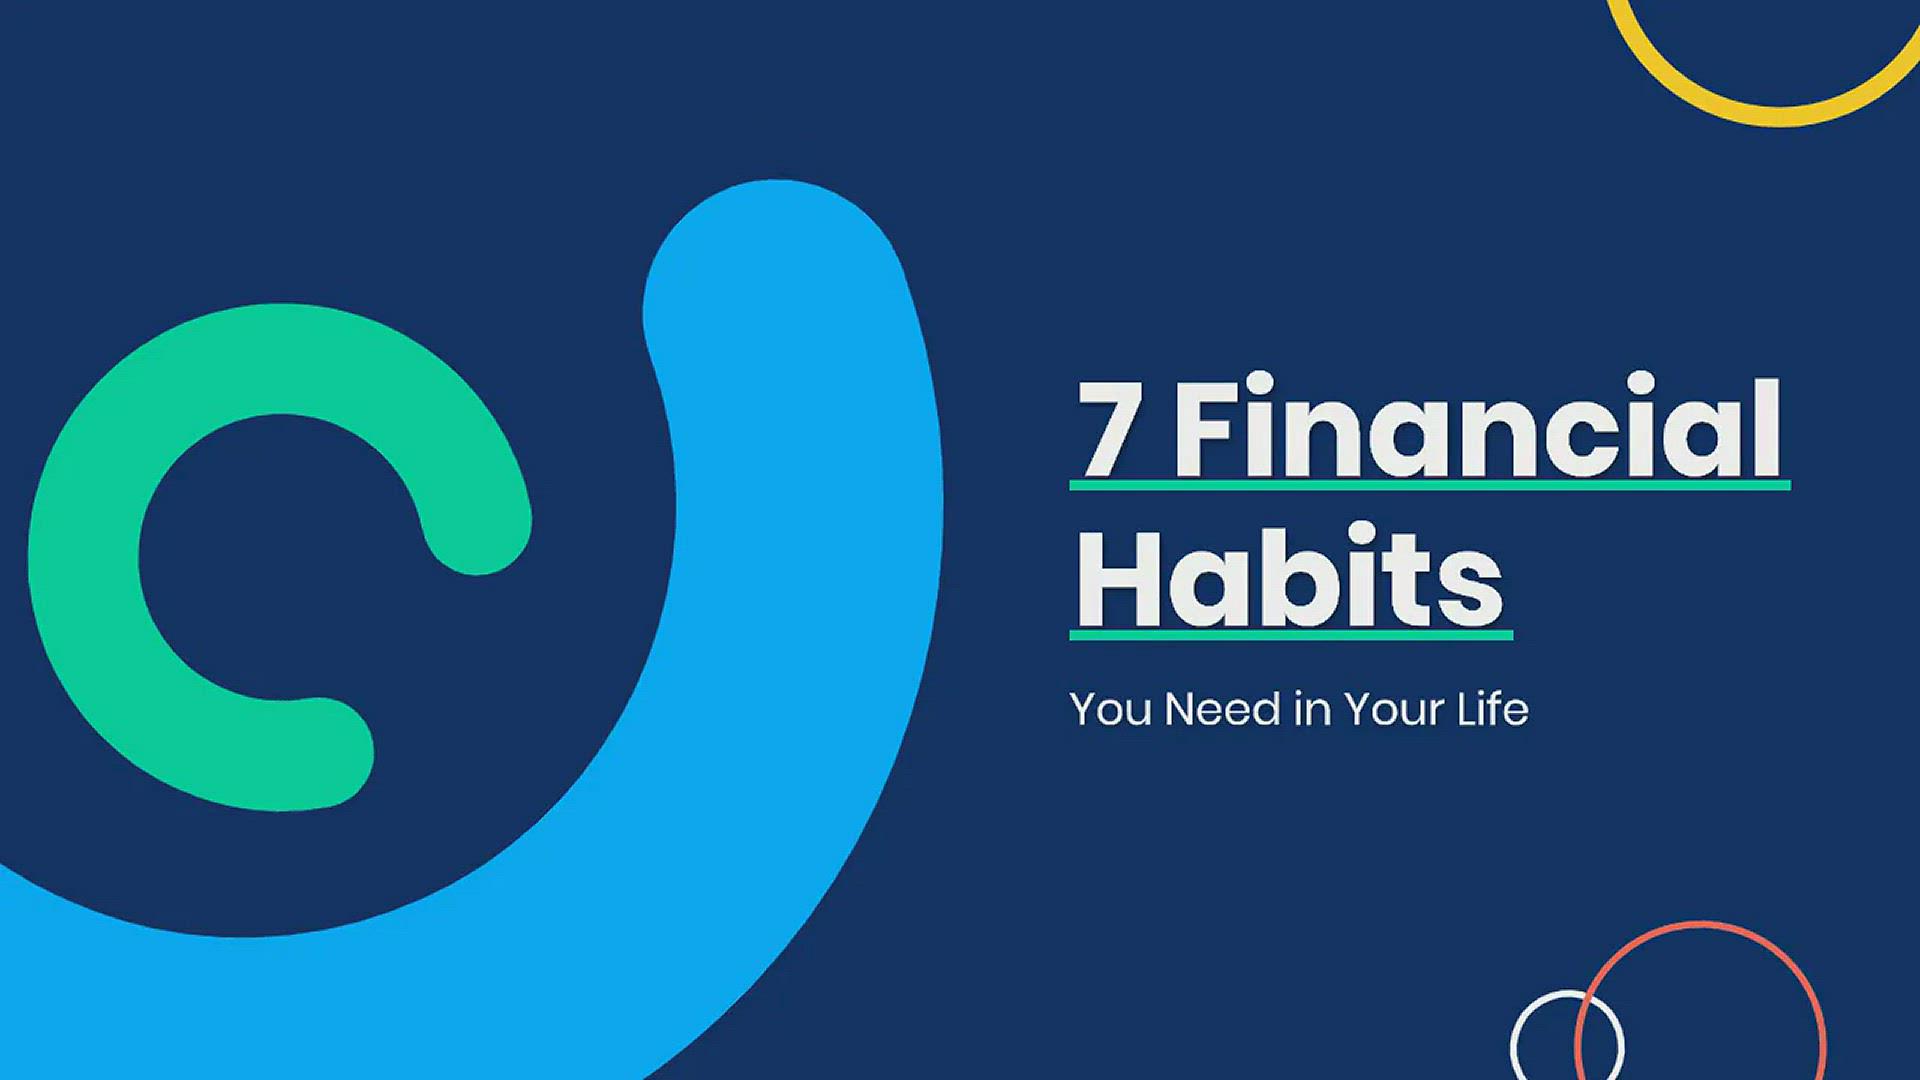 'Video thumbnail for 7 Financial Habits You Need in Your Life'